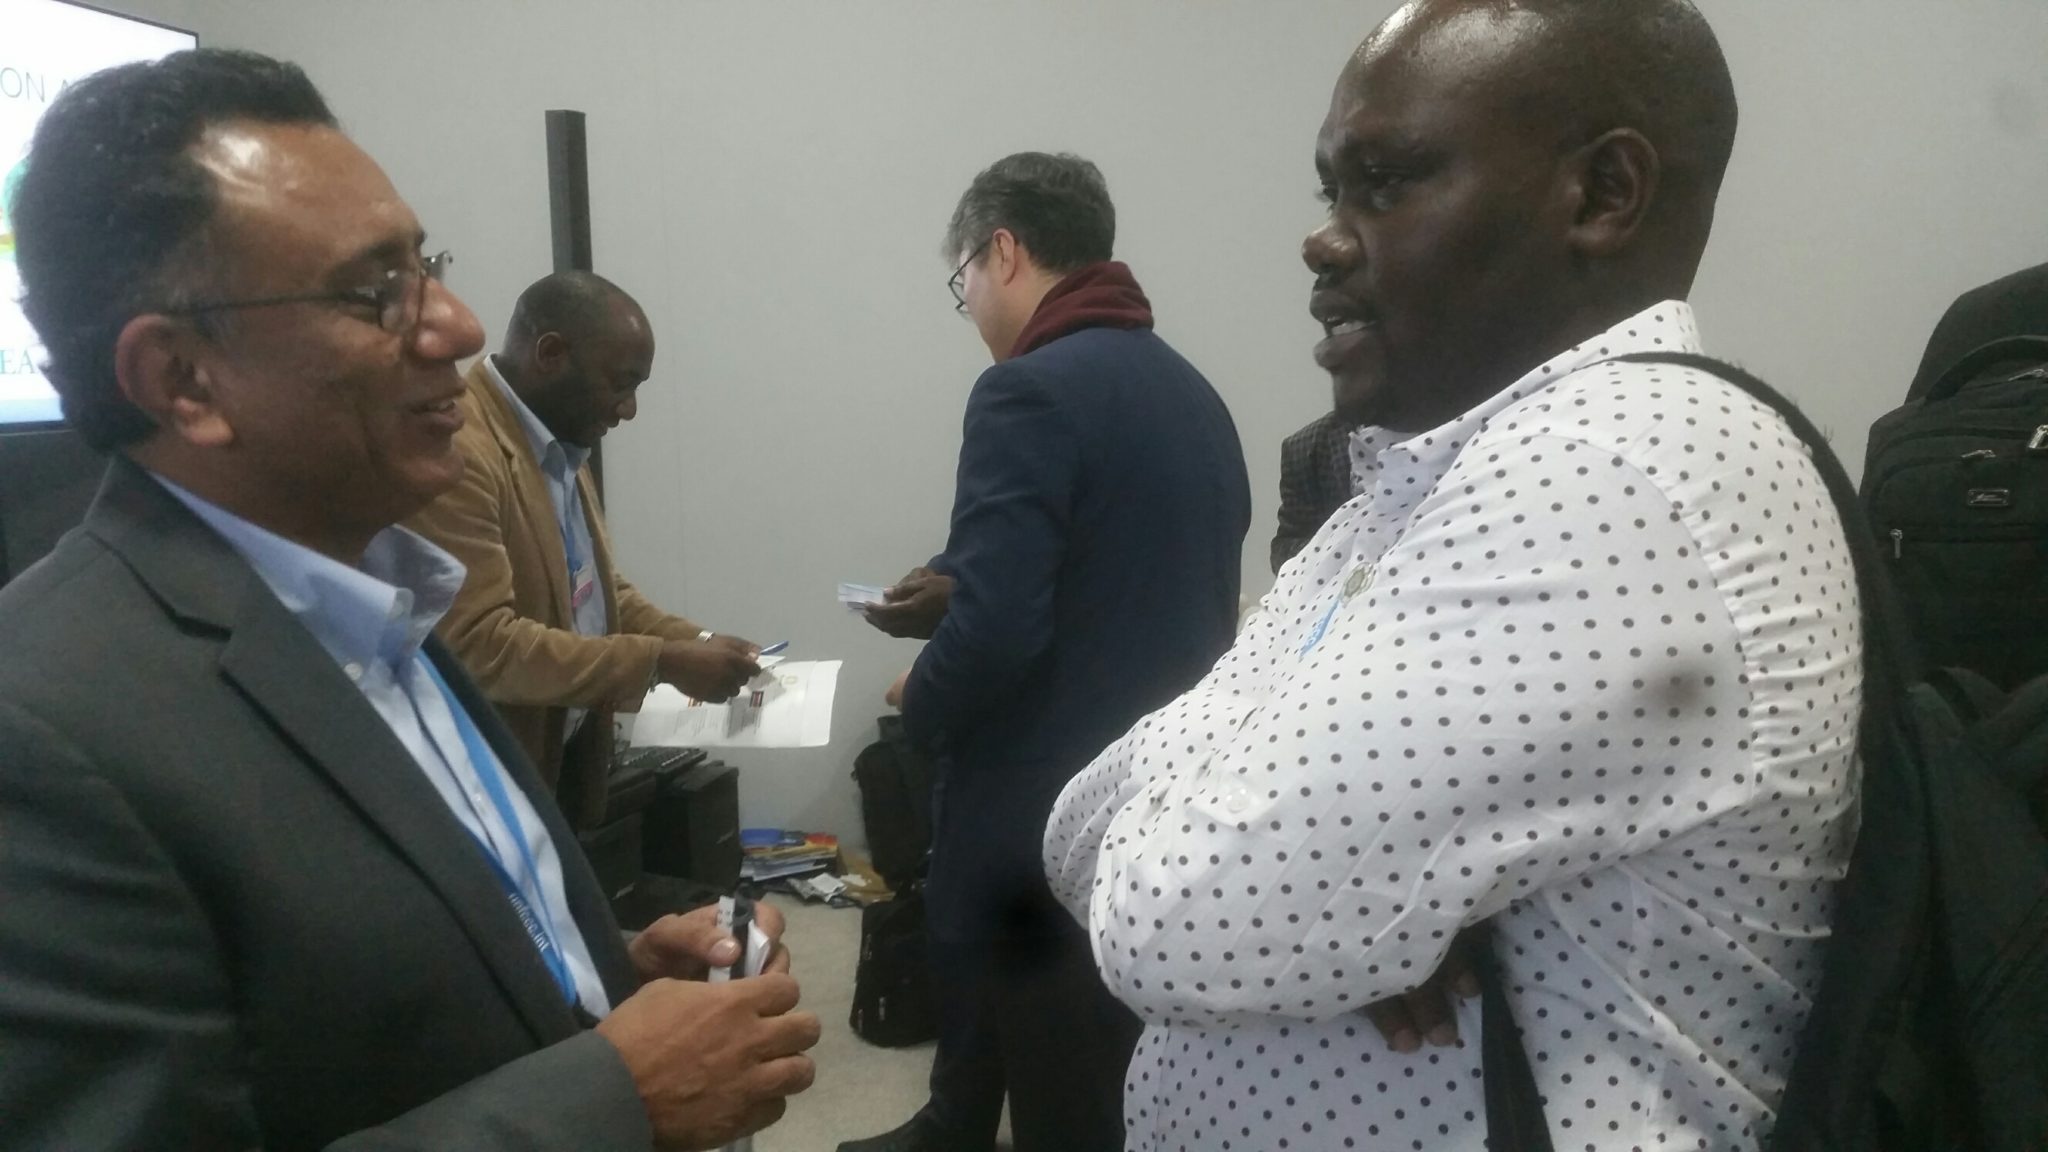 Mr. Ali Raza Rizvi, Programme Manager of Ecosystem Based Adaptation at IUCN (left) chats with Gideon Sanago (right) of Pingos Forum Tanzania at the end of the the EAC side-event at COP in Marrakech.  